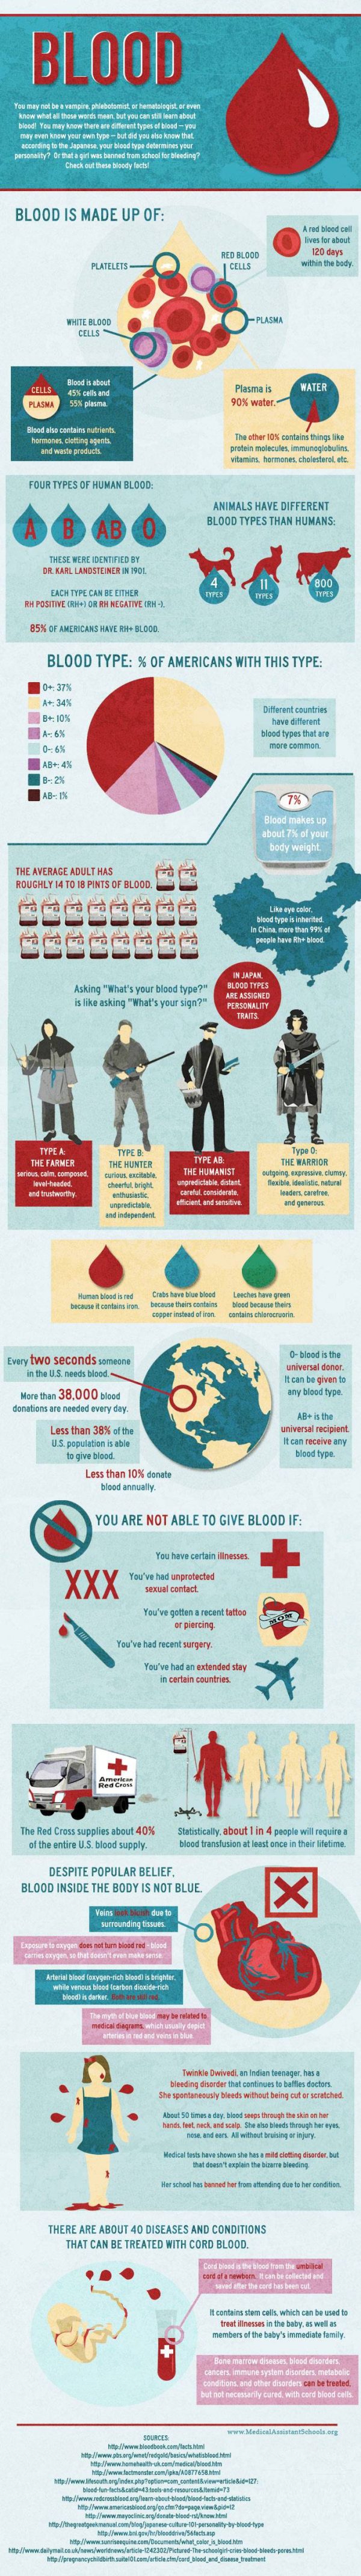 Facts About Blood (Infographic)